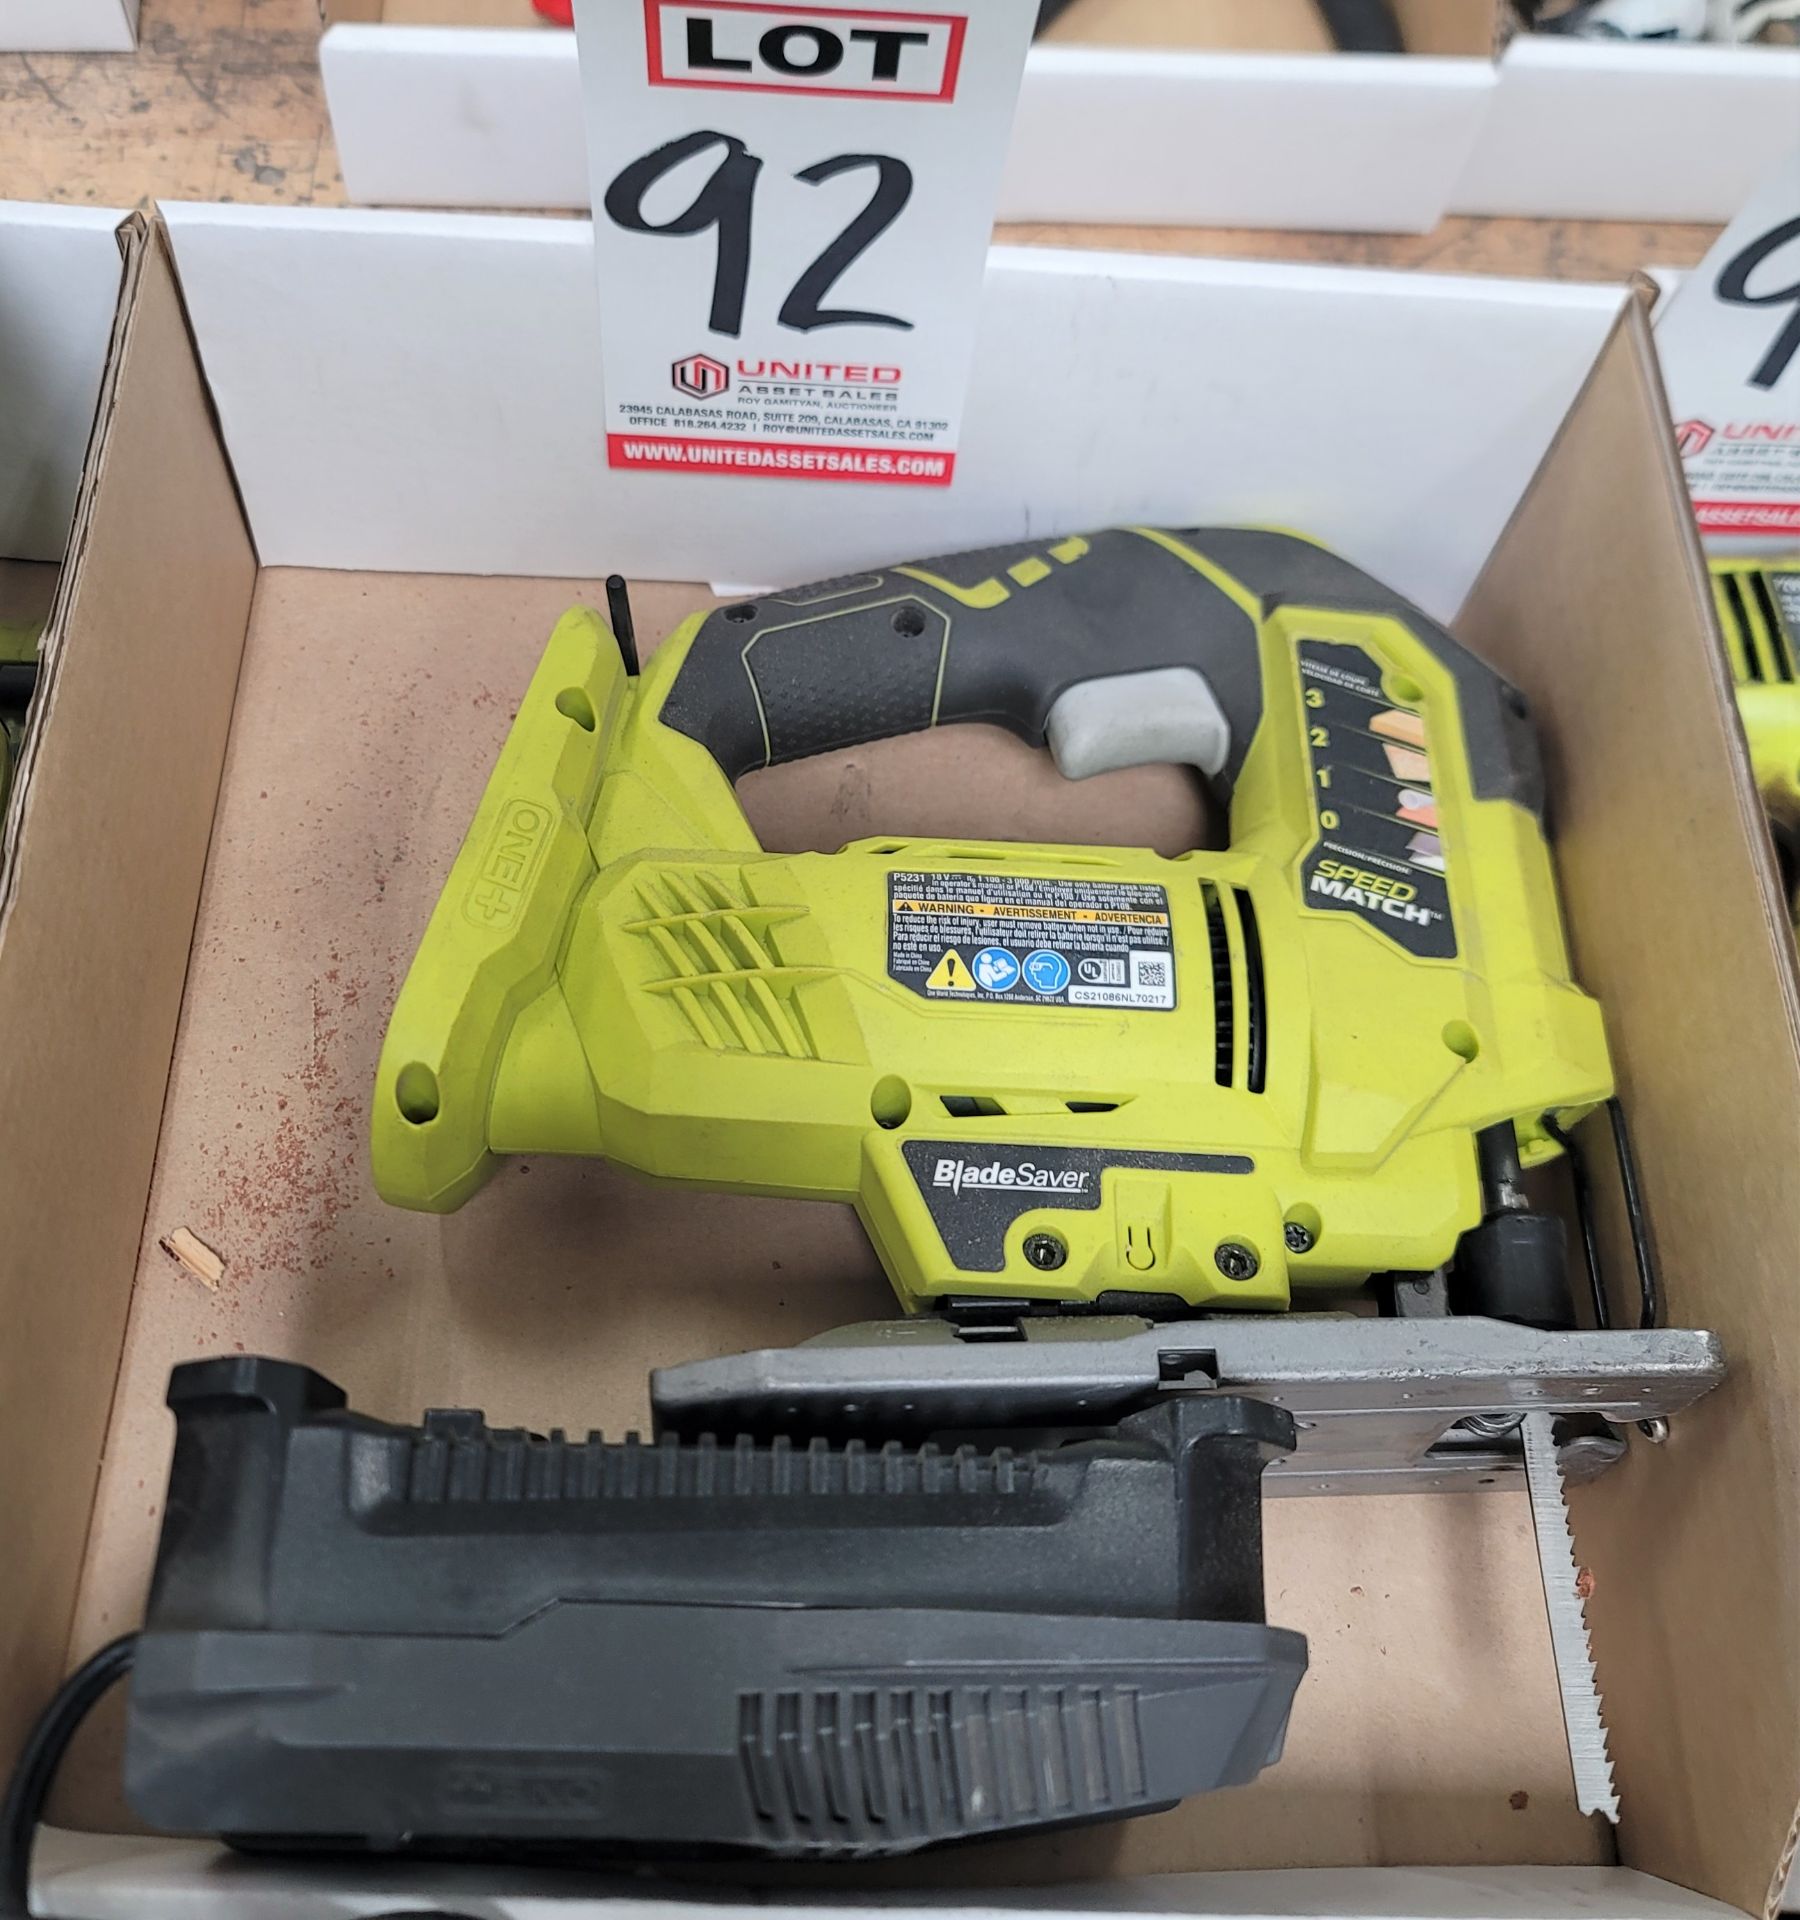 LOT - (1) RYOBI P271 RECHARGEABLE DRILL, (1) P5231 CORDLESS JIG SAW & (1) 18V BATTERY & CHARGER - Image 2 of 2